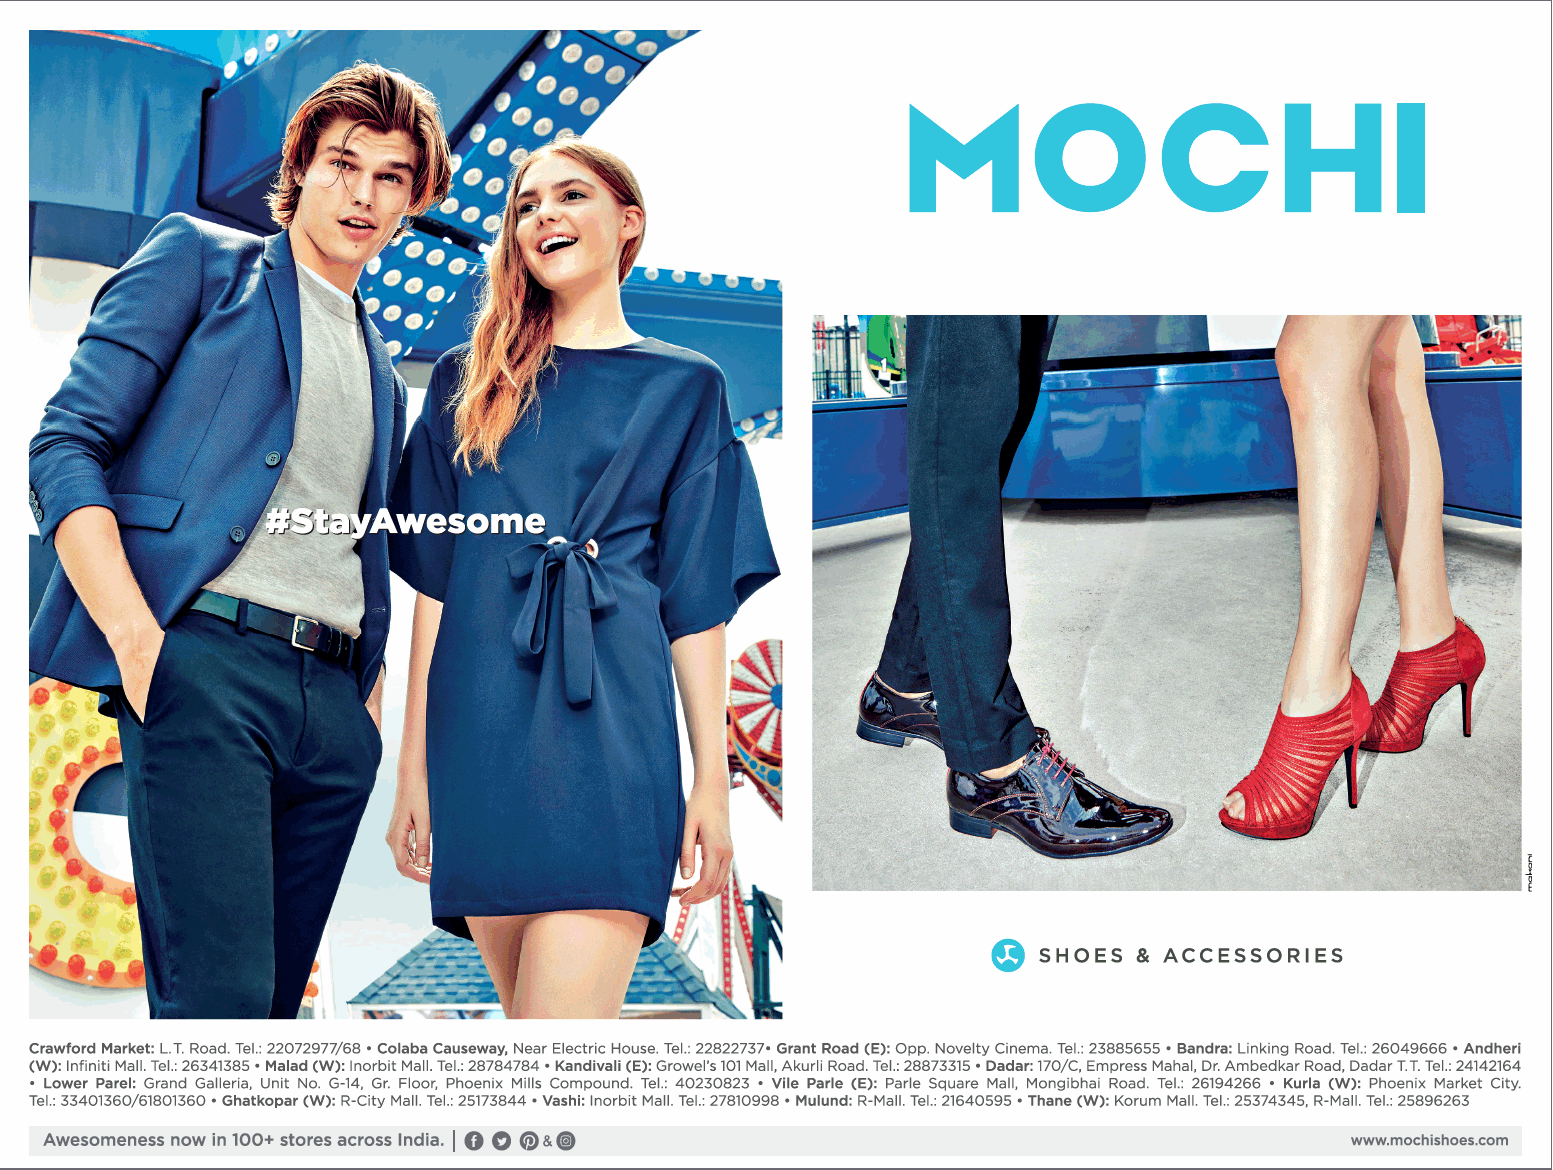 https://newspaperads.ads2publish.com/wp-content/uploads/2017/12/mochi-shoes-and-accessories-stay-awesome-ad-bombay-times-22-12-2017.png